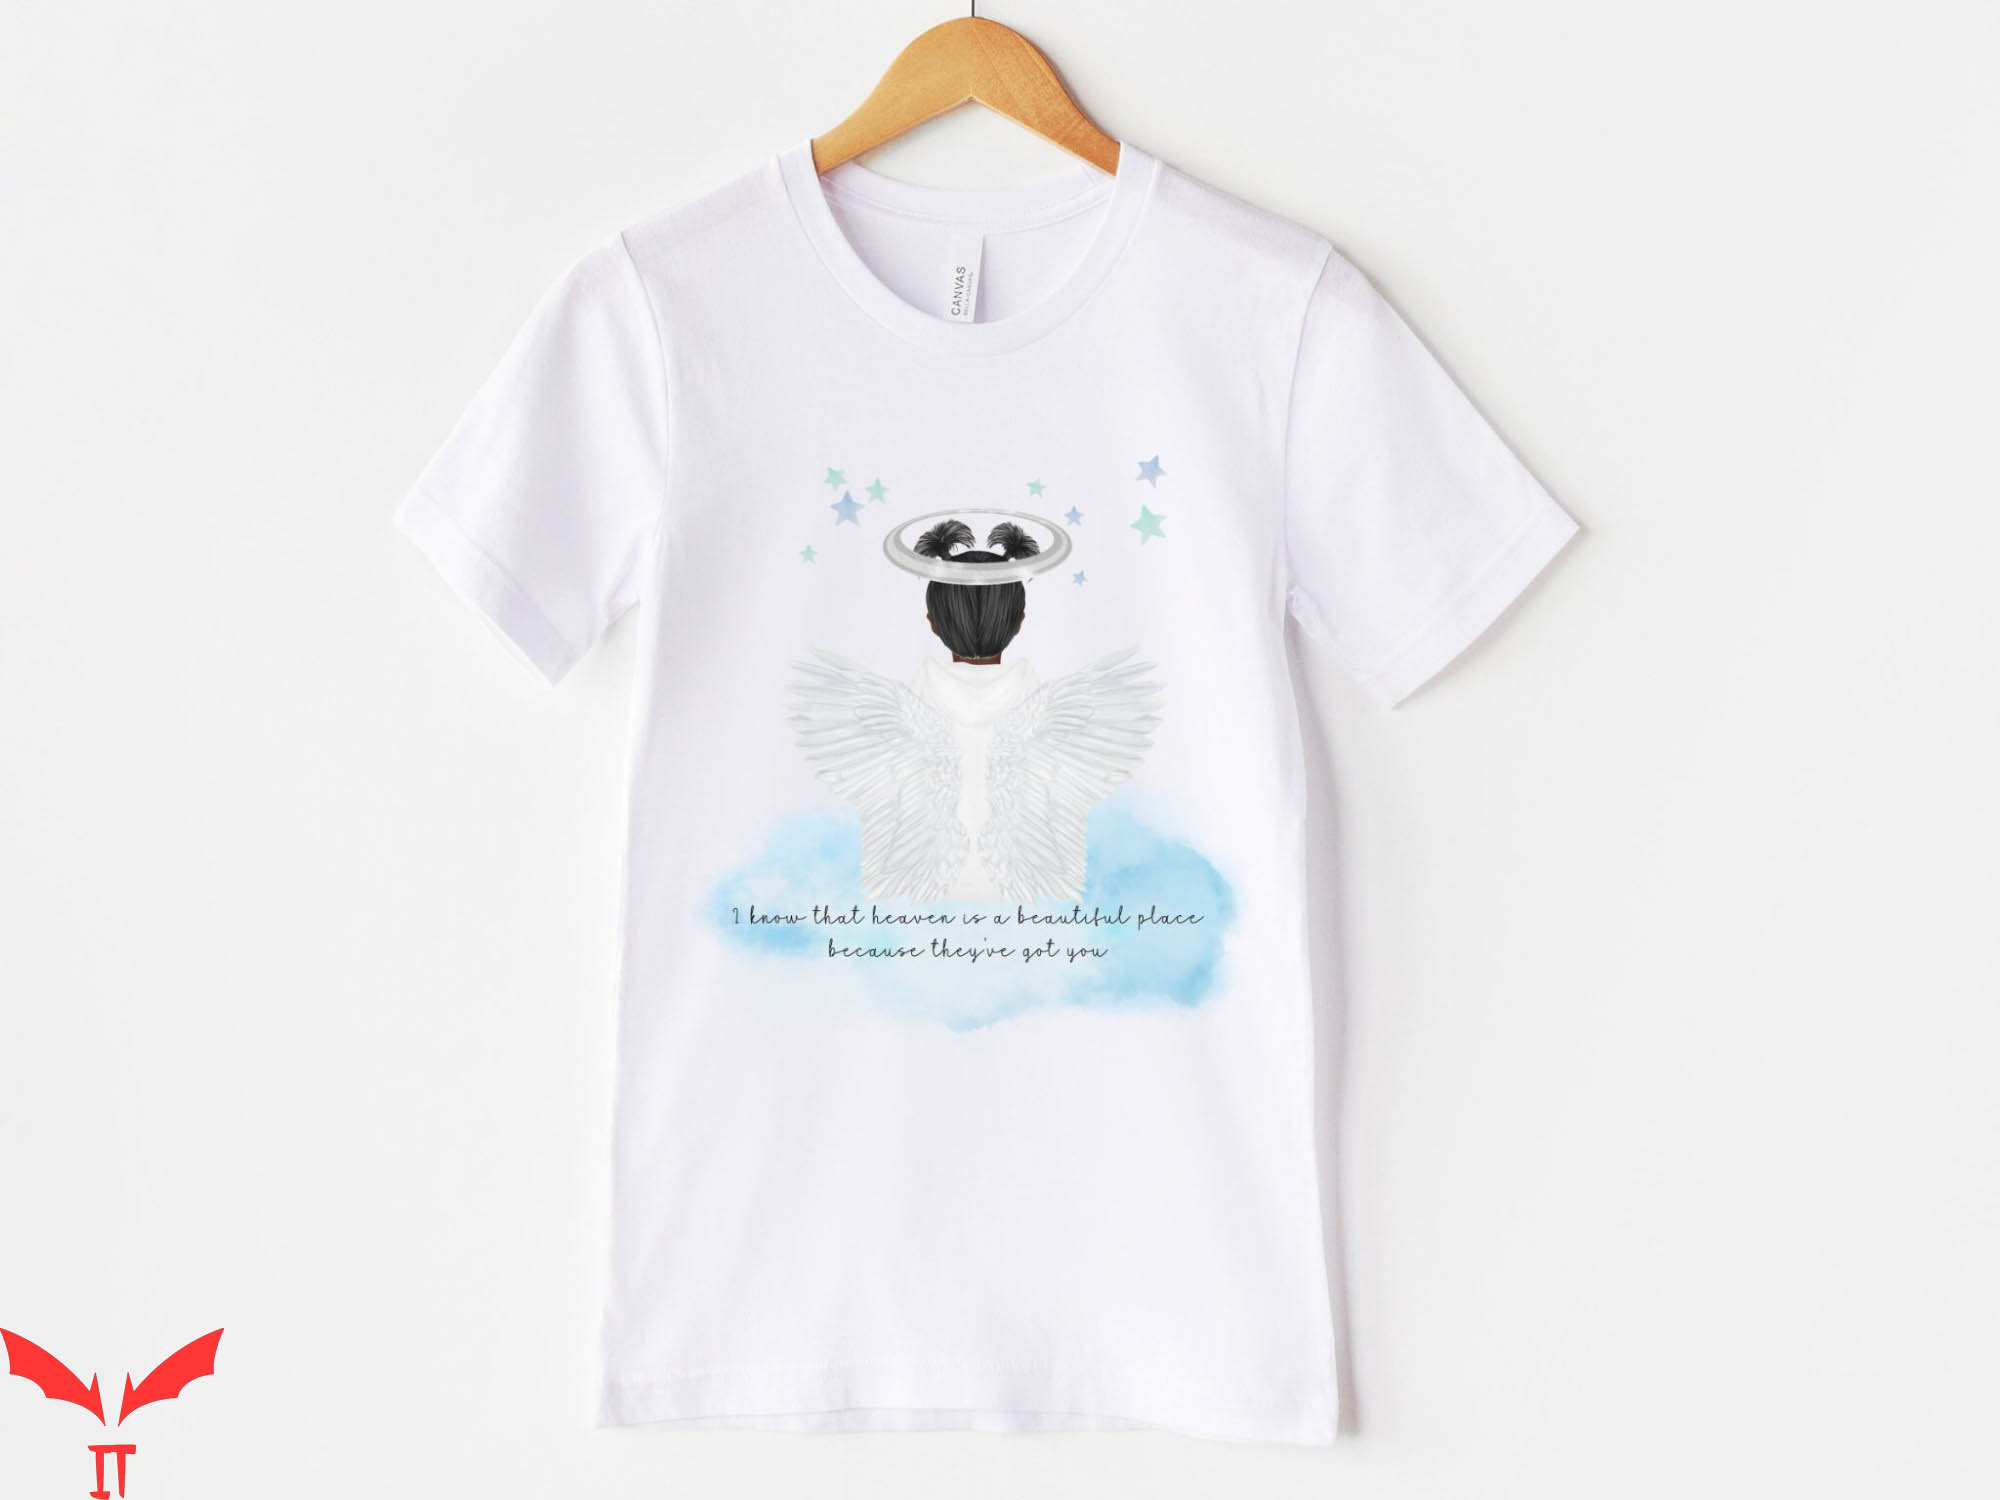 Rest In Peace T-Shirt In Memory Angel Wings Tee Shirt